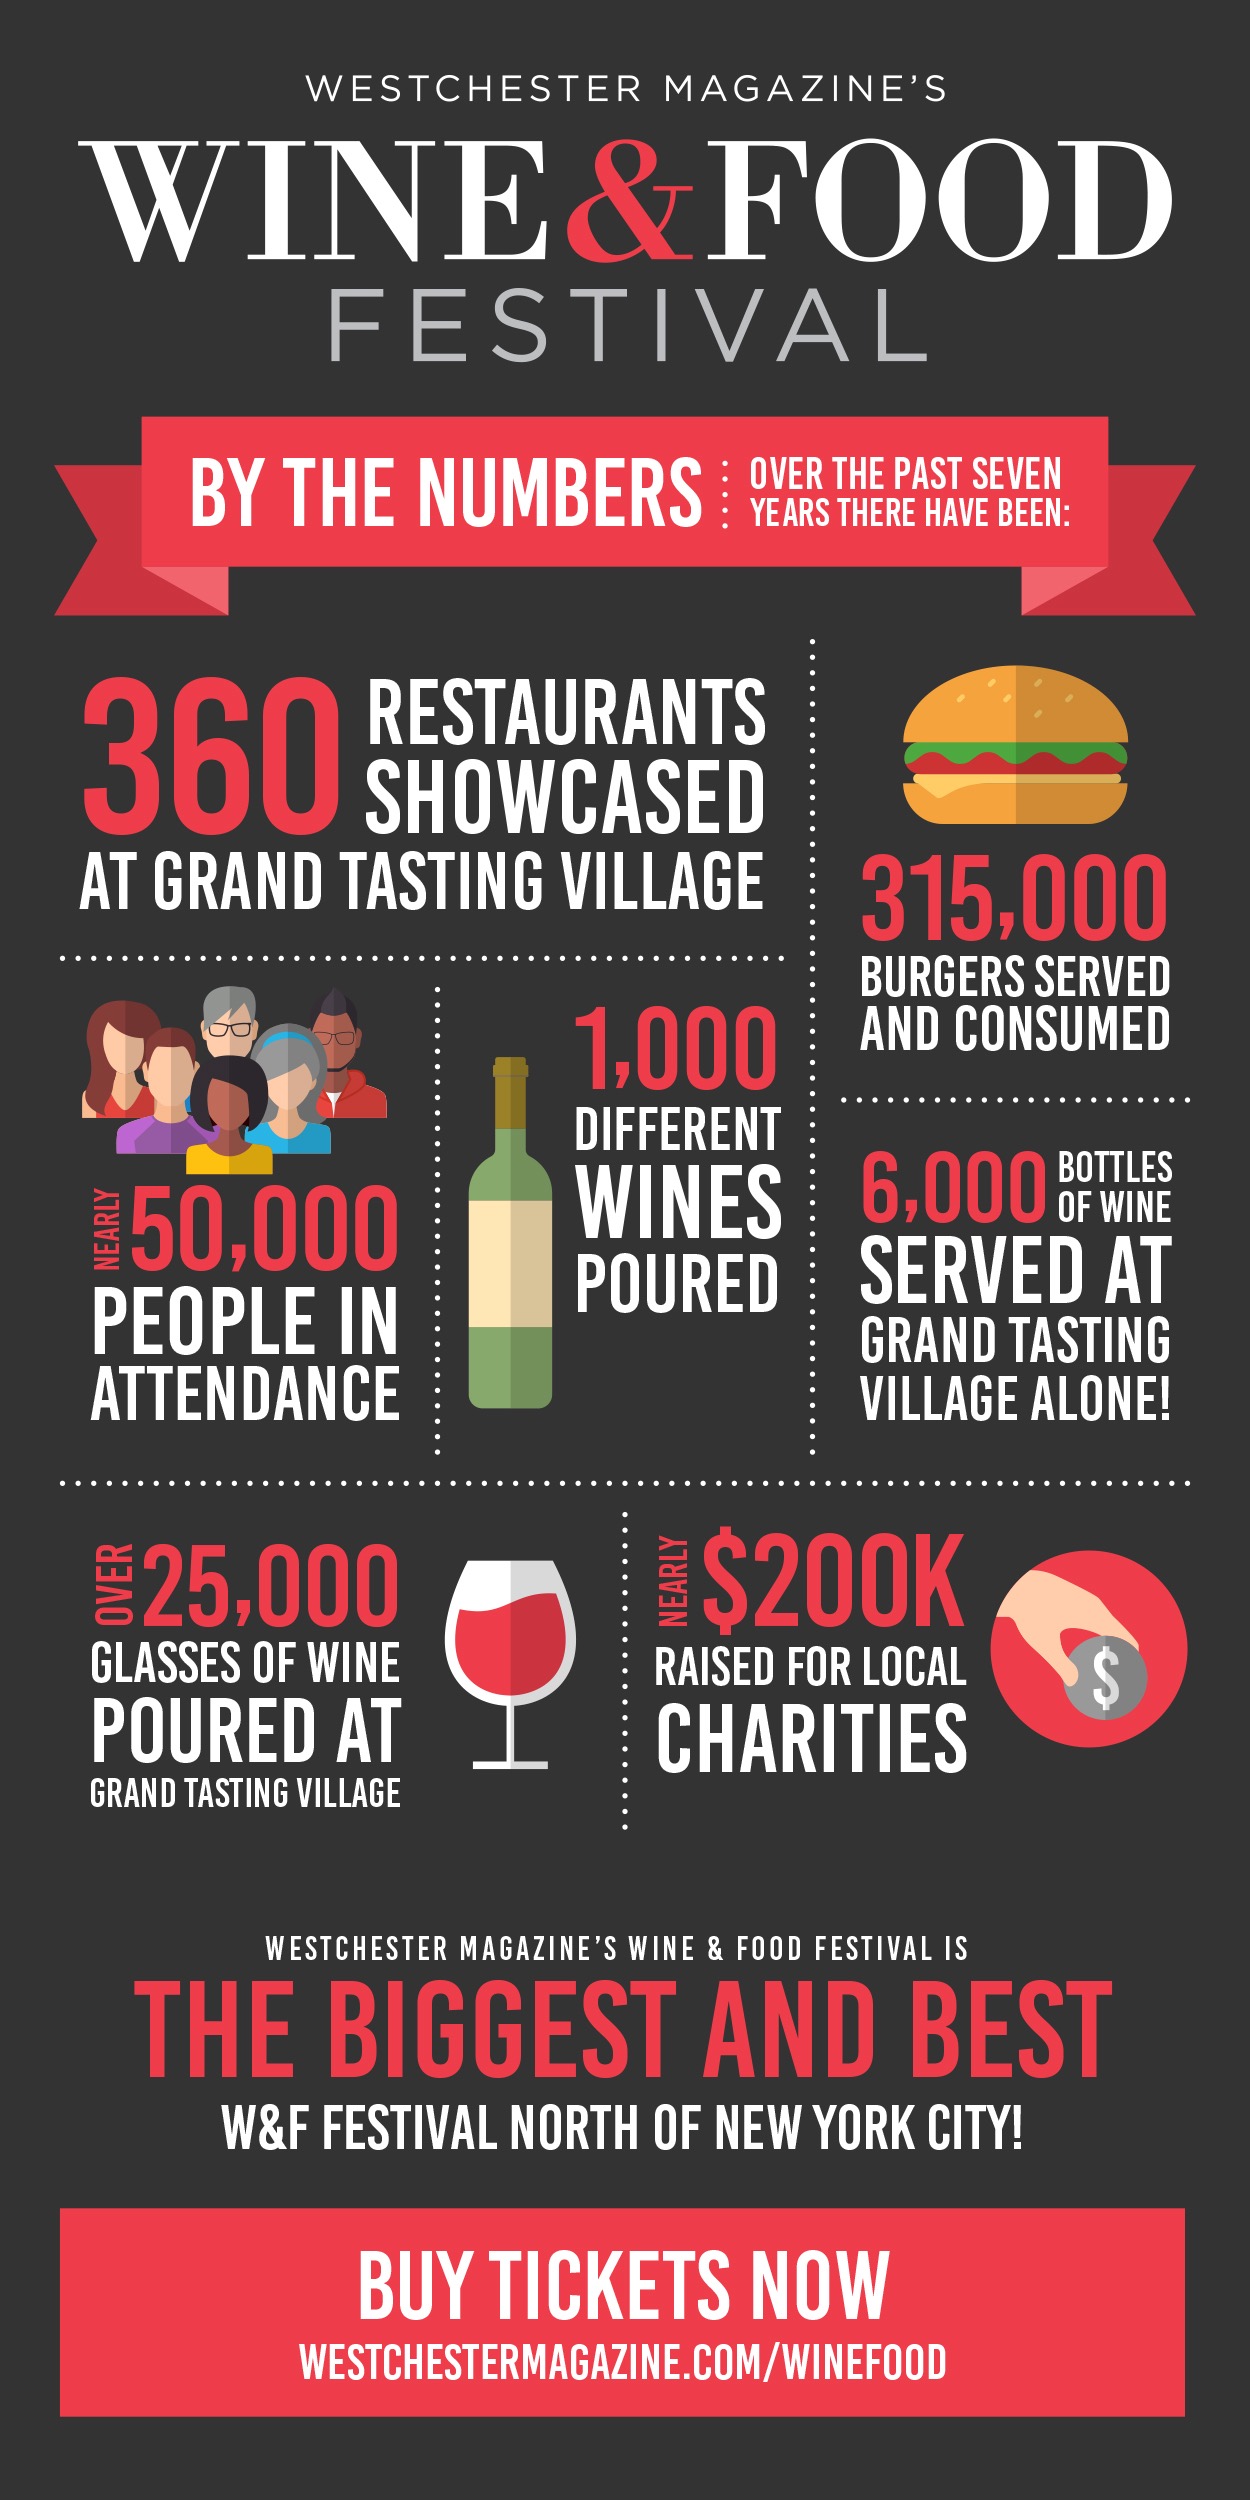 The Top Wine & Food Festival Worth Visiting